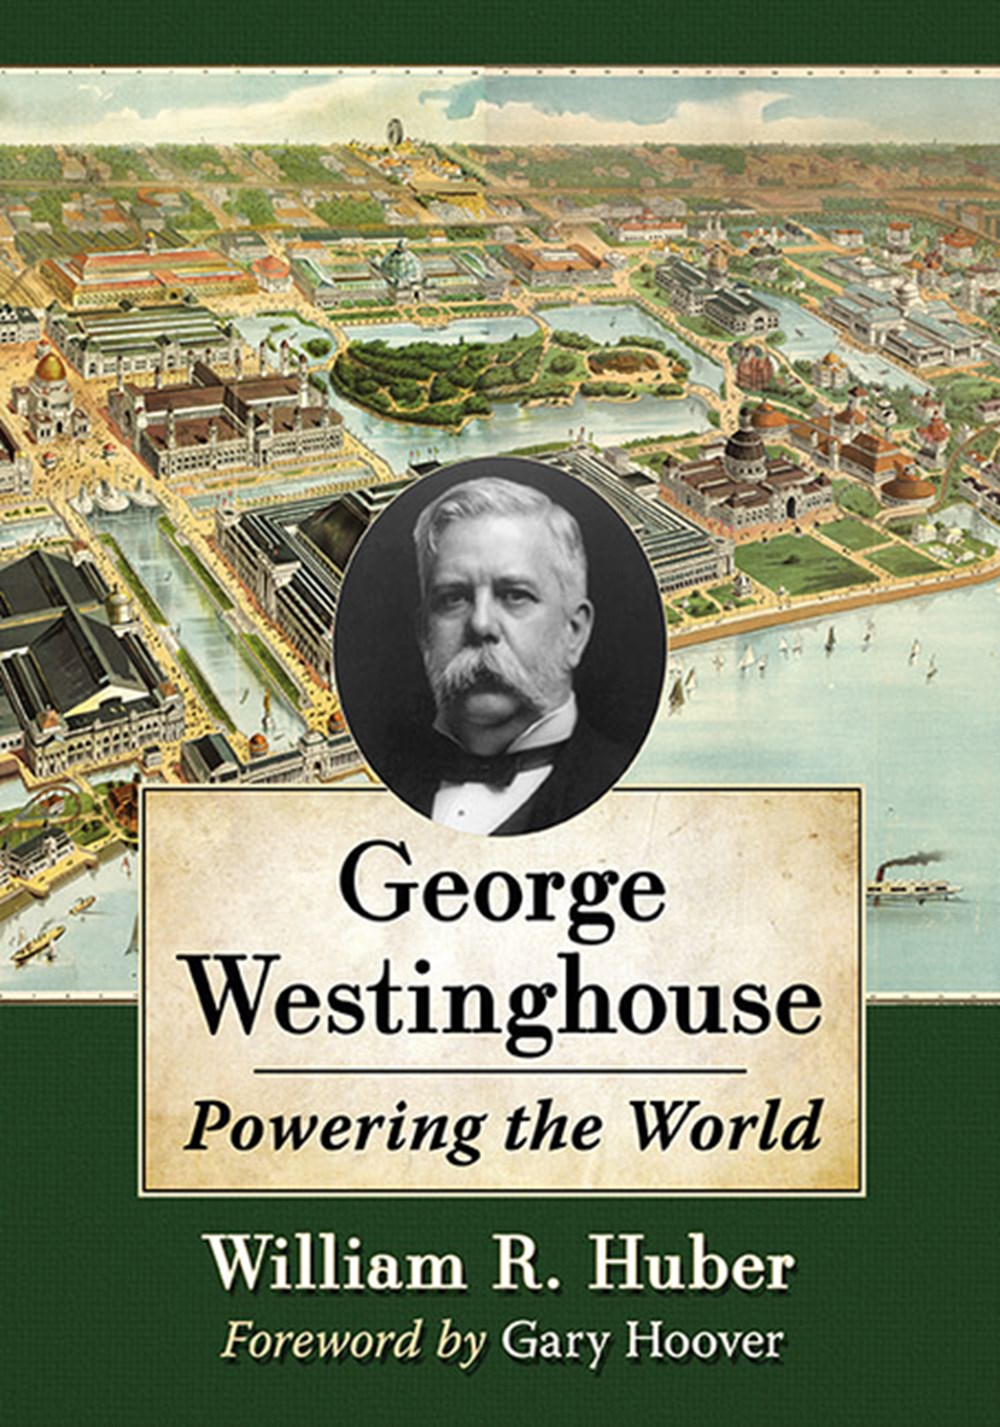 George Westinghouse Powering the World